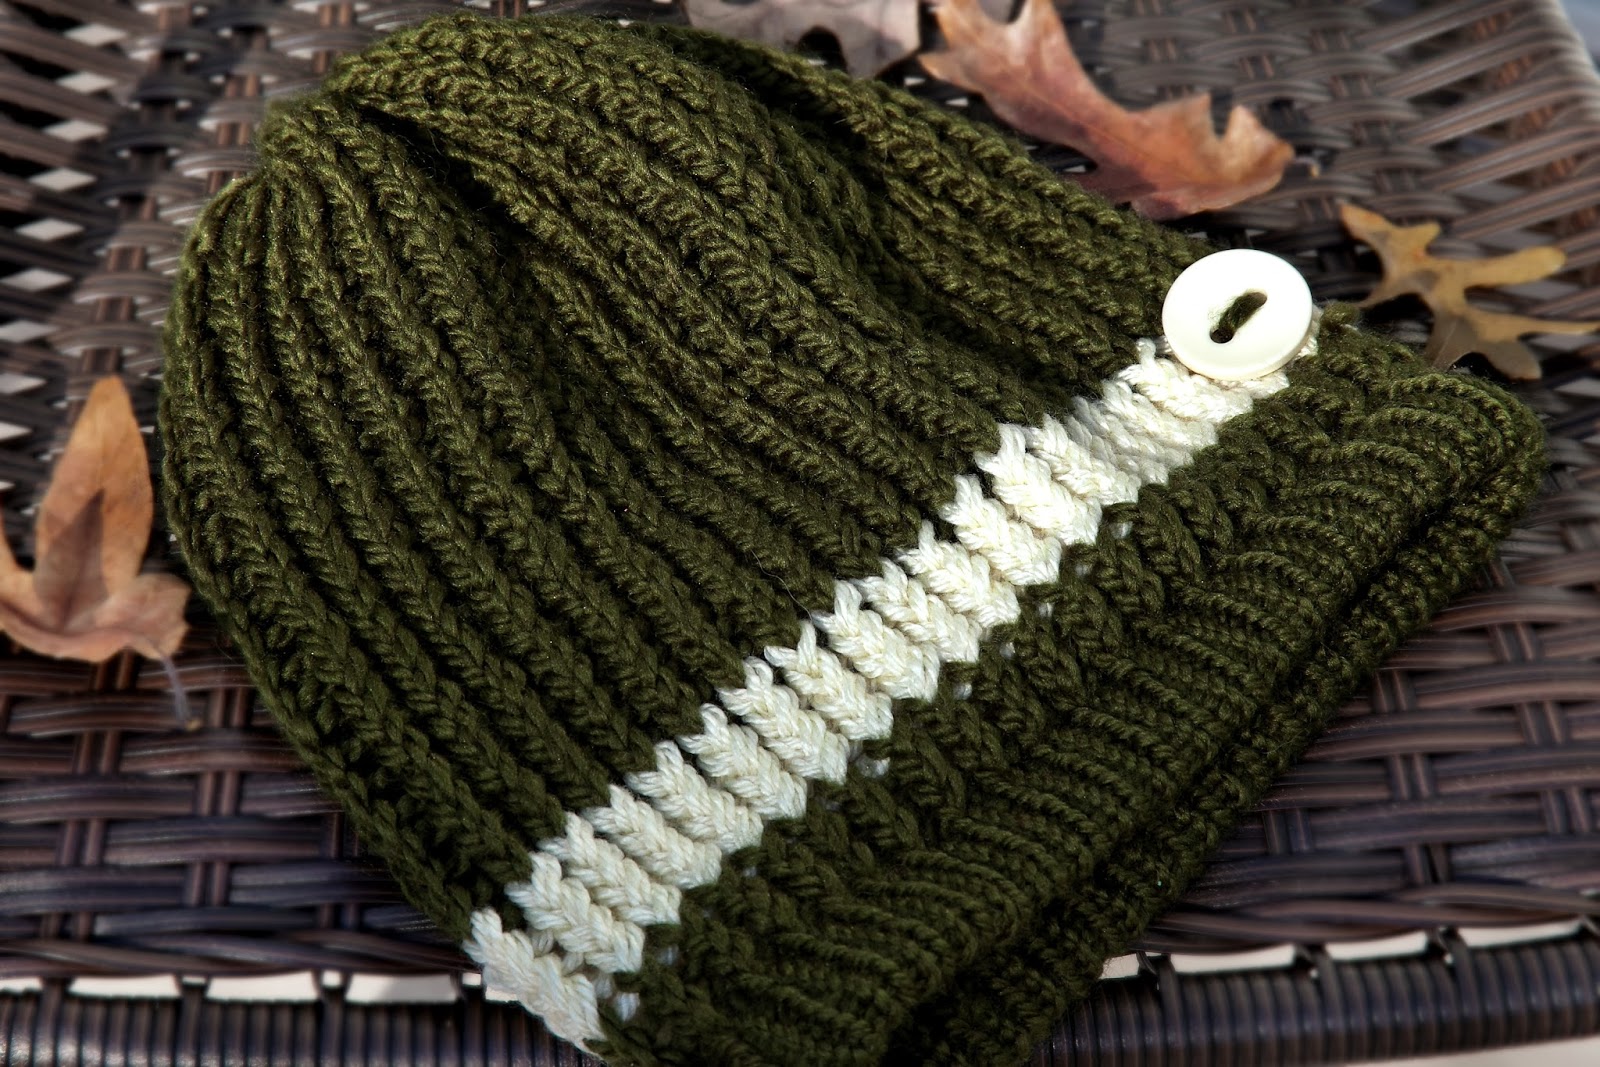 How to Round Loom Knit a Slouchy Beanie Hat